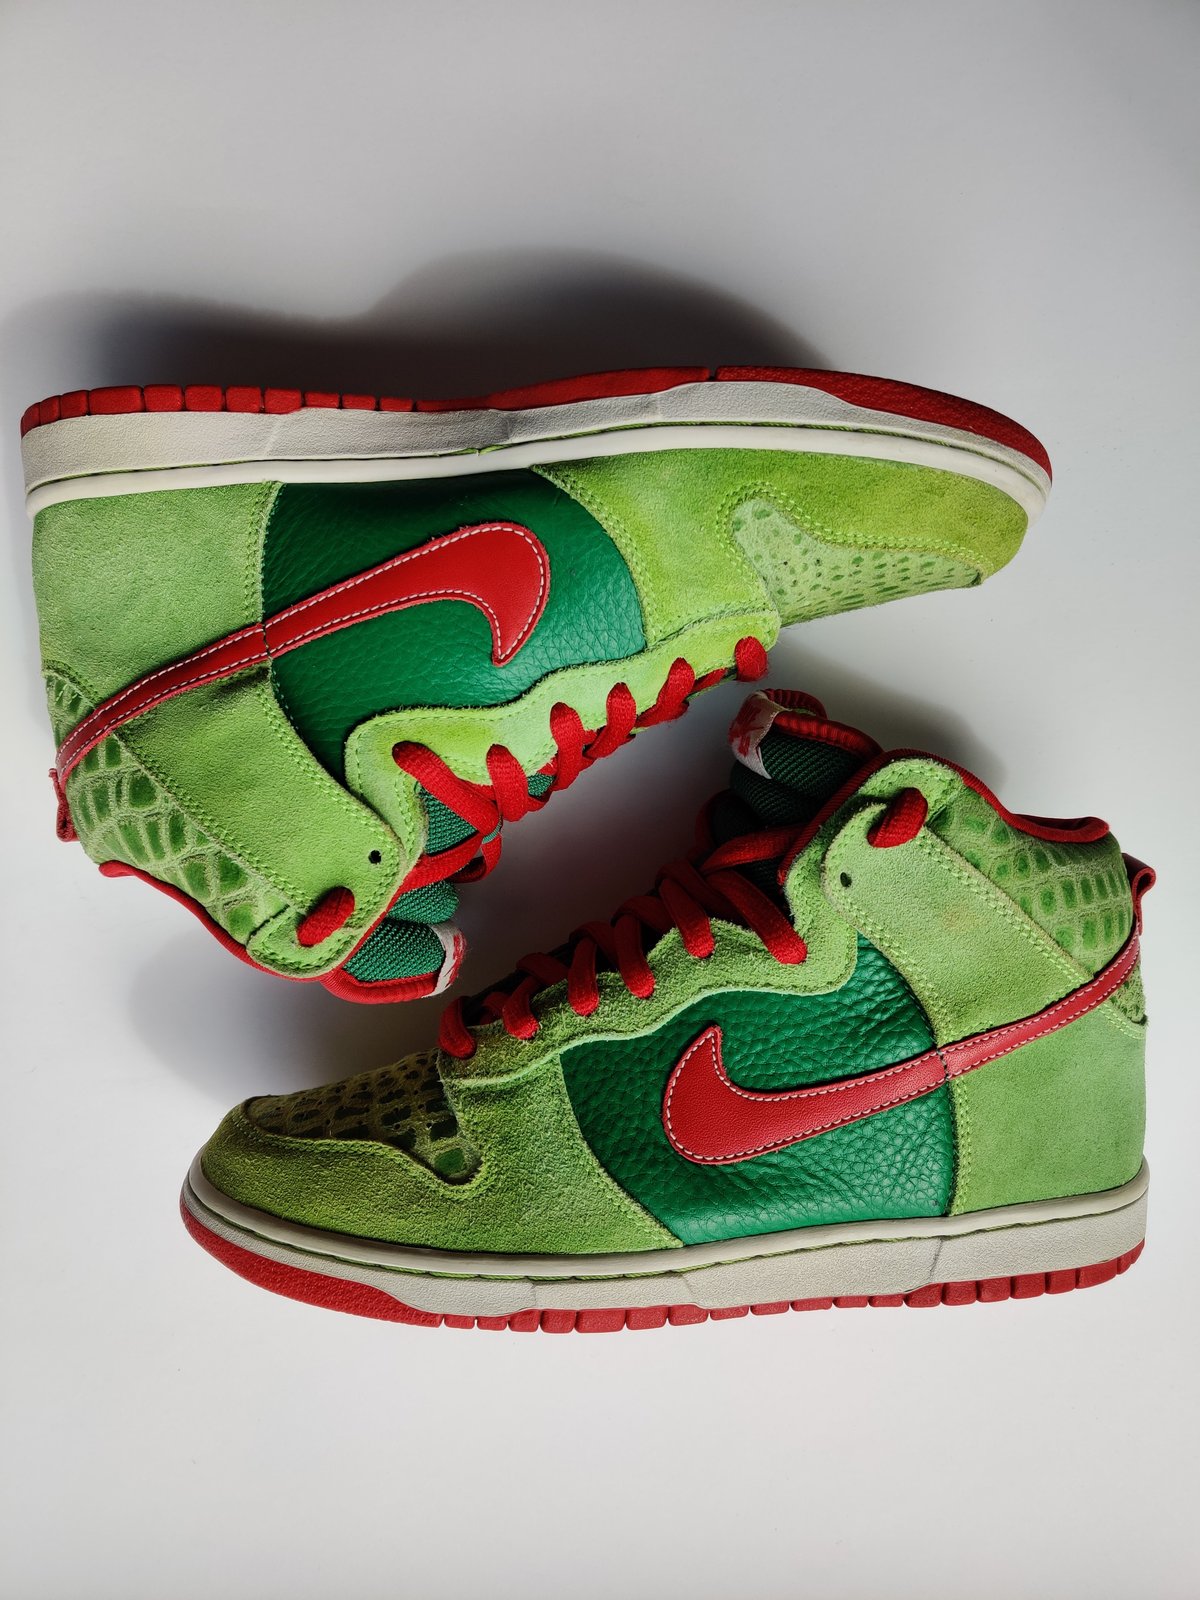 nike dr feelgood shoes